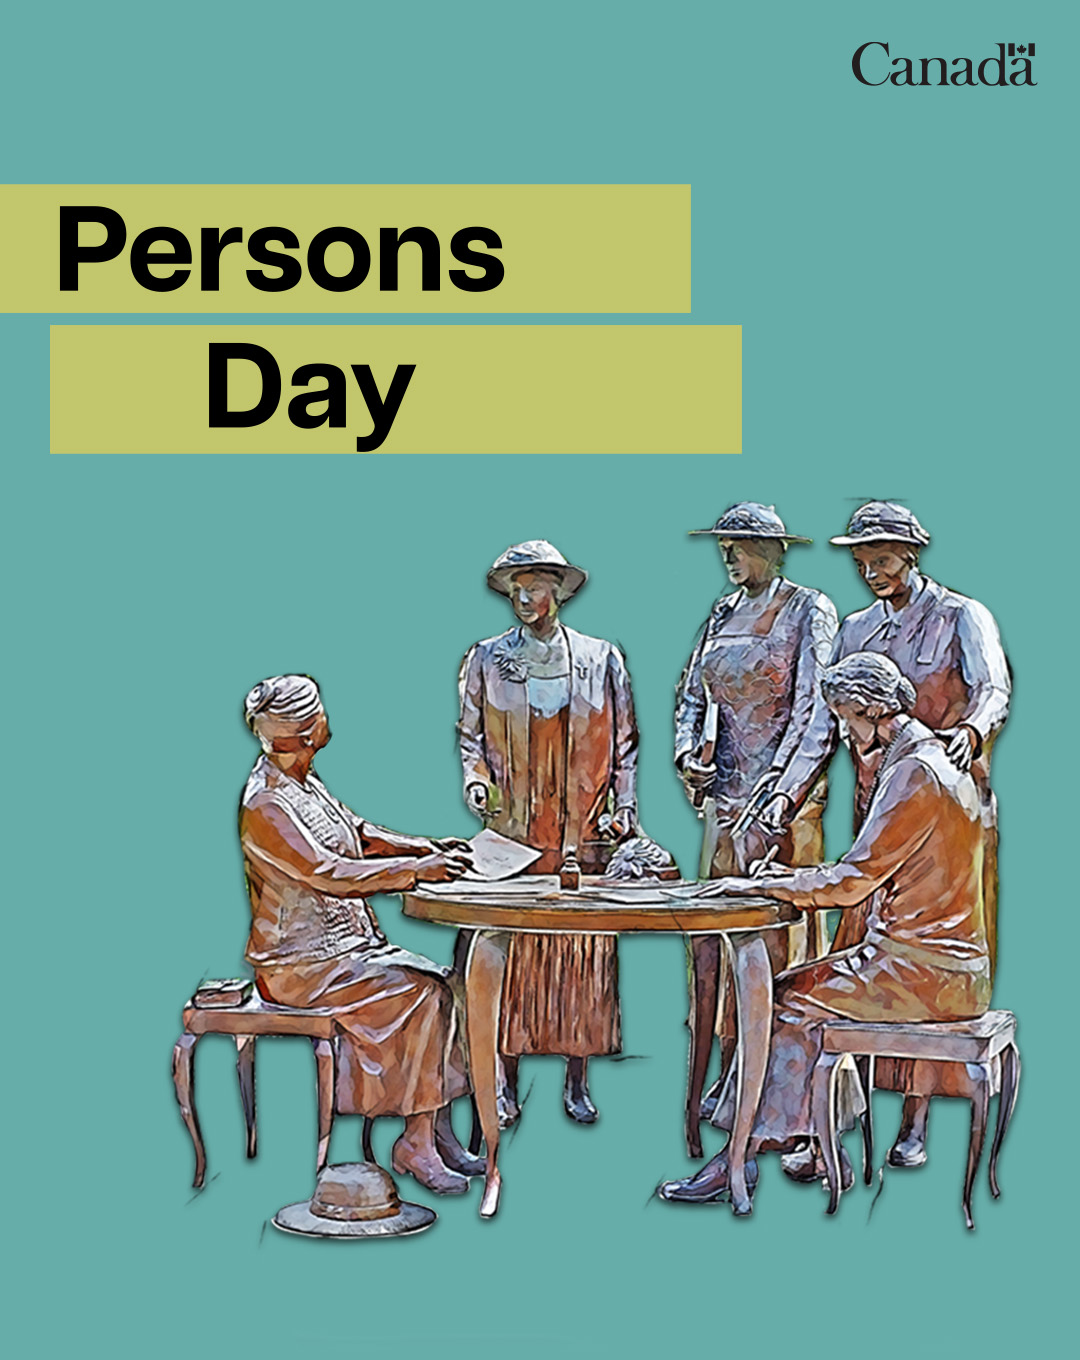 Persons Day social media creative